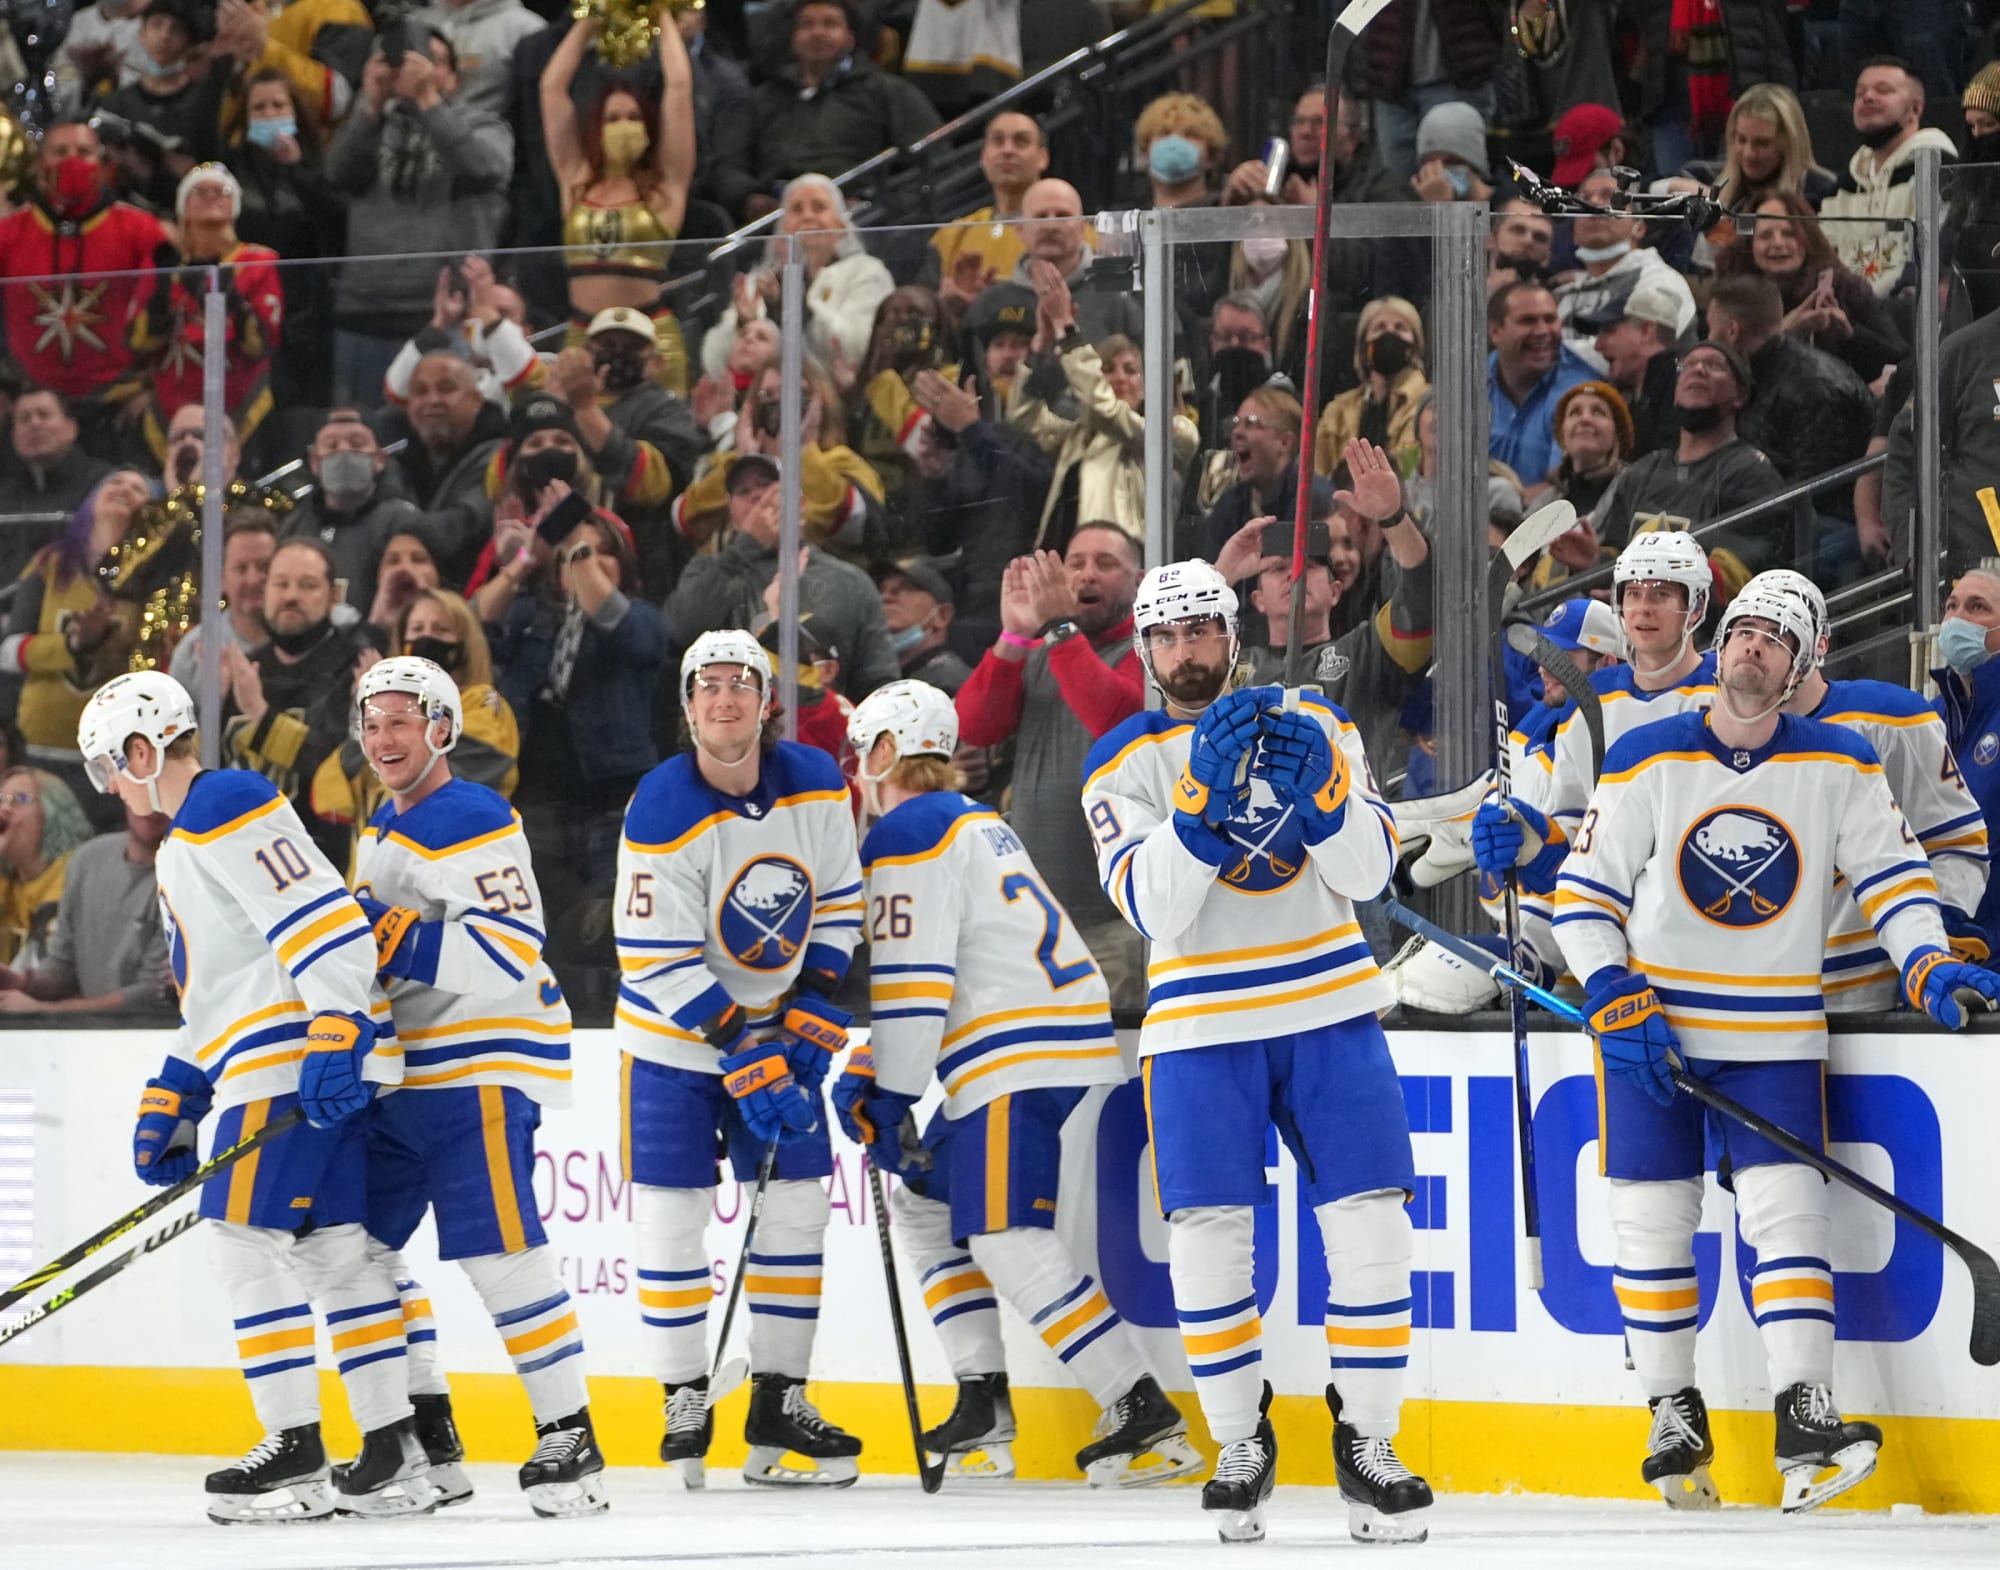 Start the season right at the 2022 Buffalo Sabres Fan Fest